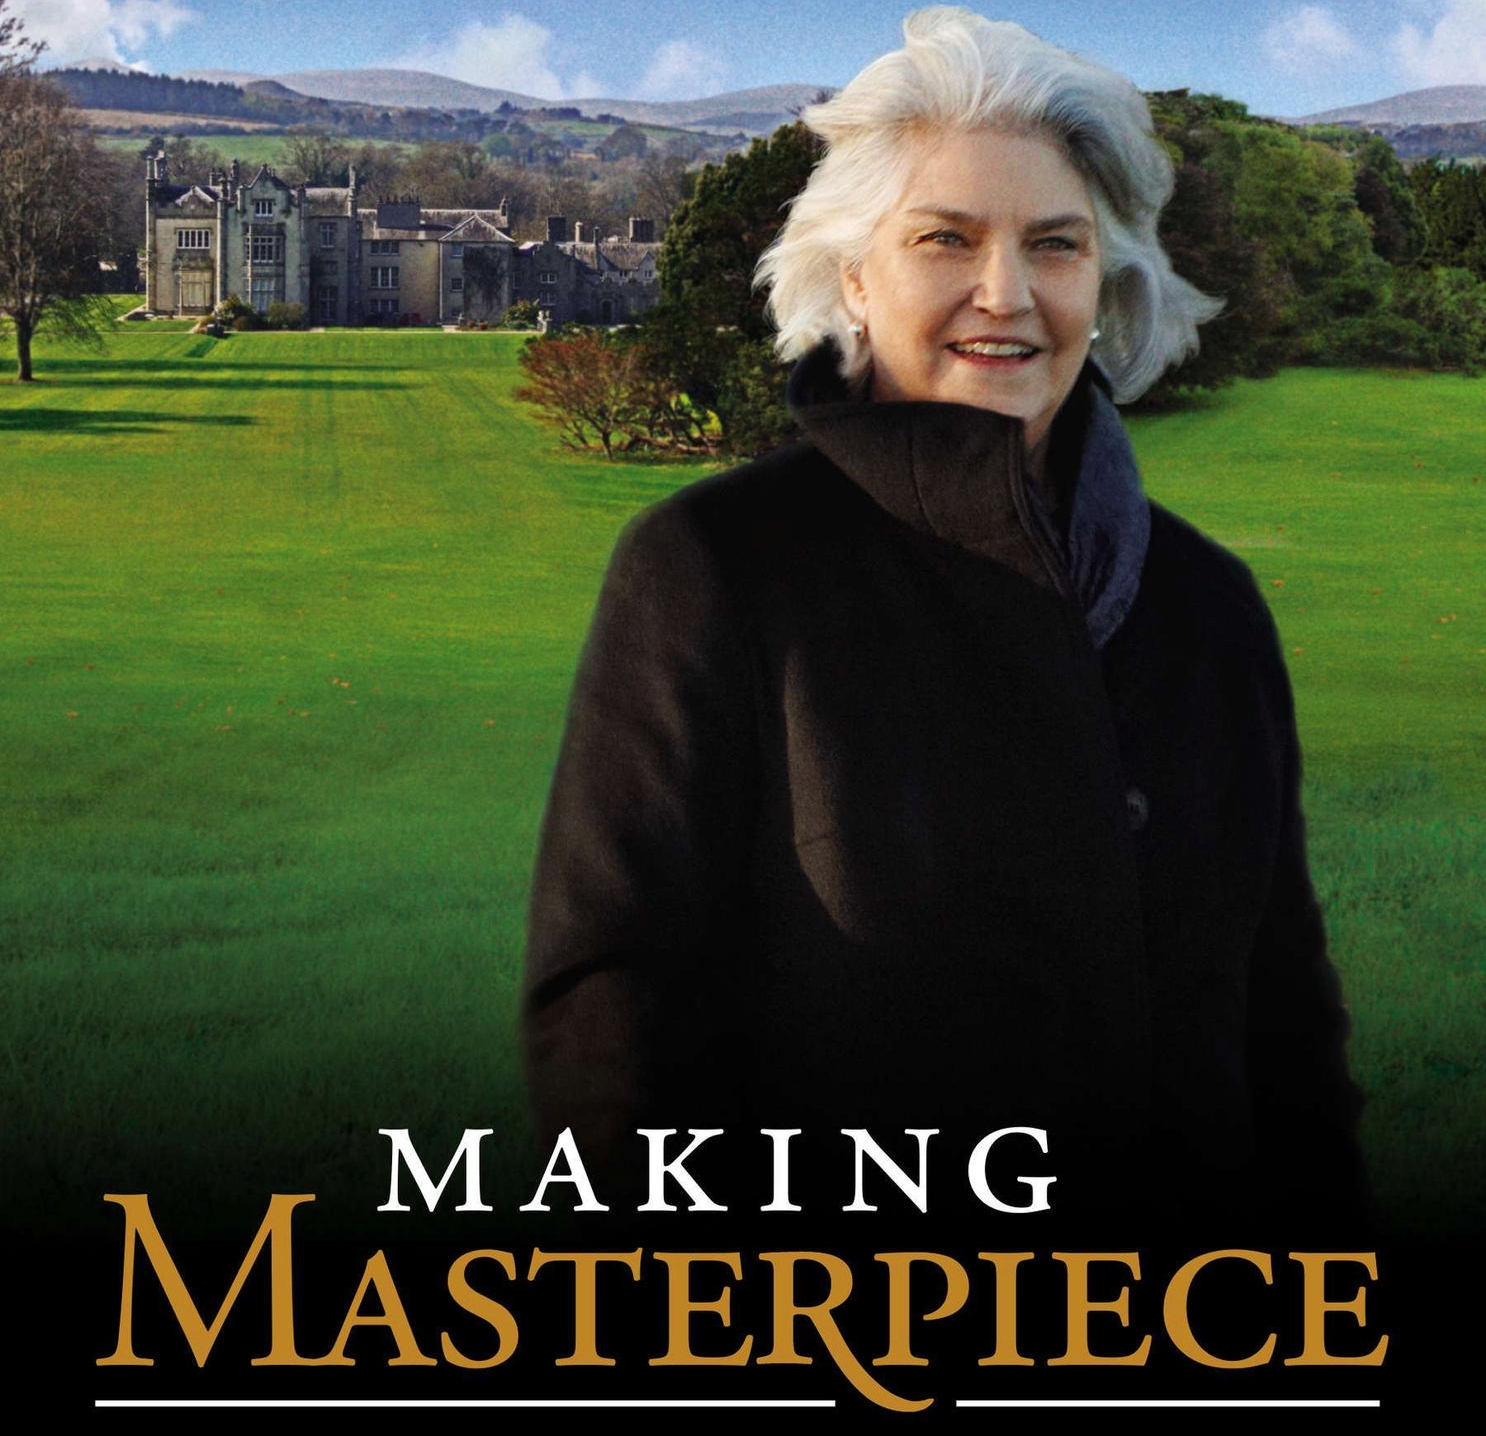 The cover of Eaton's memoir, "Making Masterpiece"